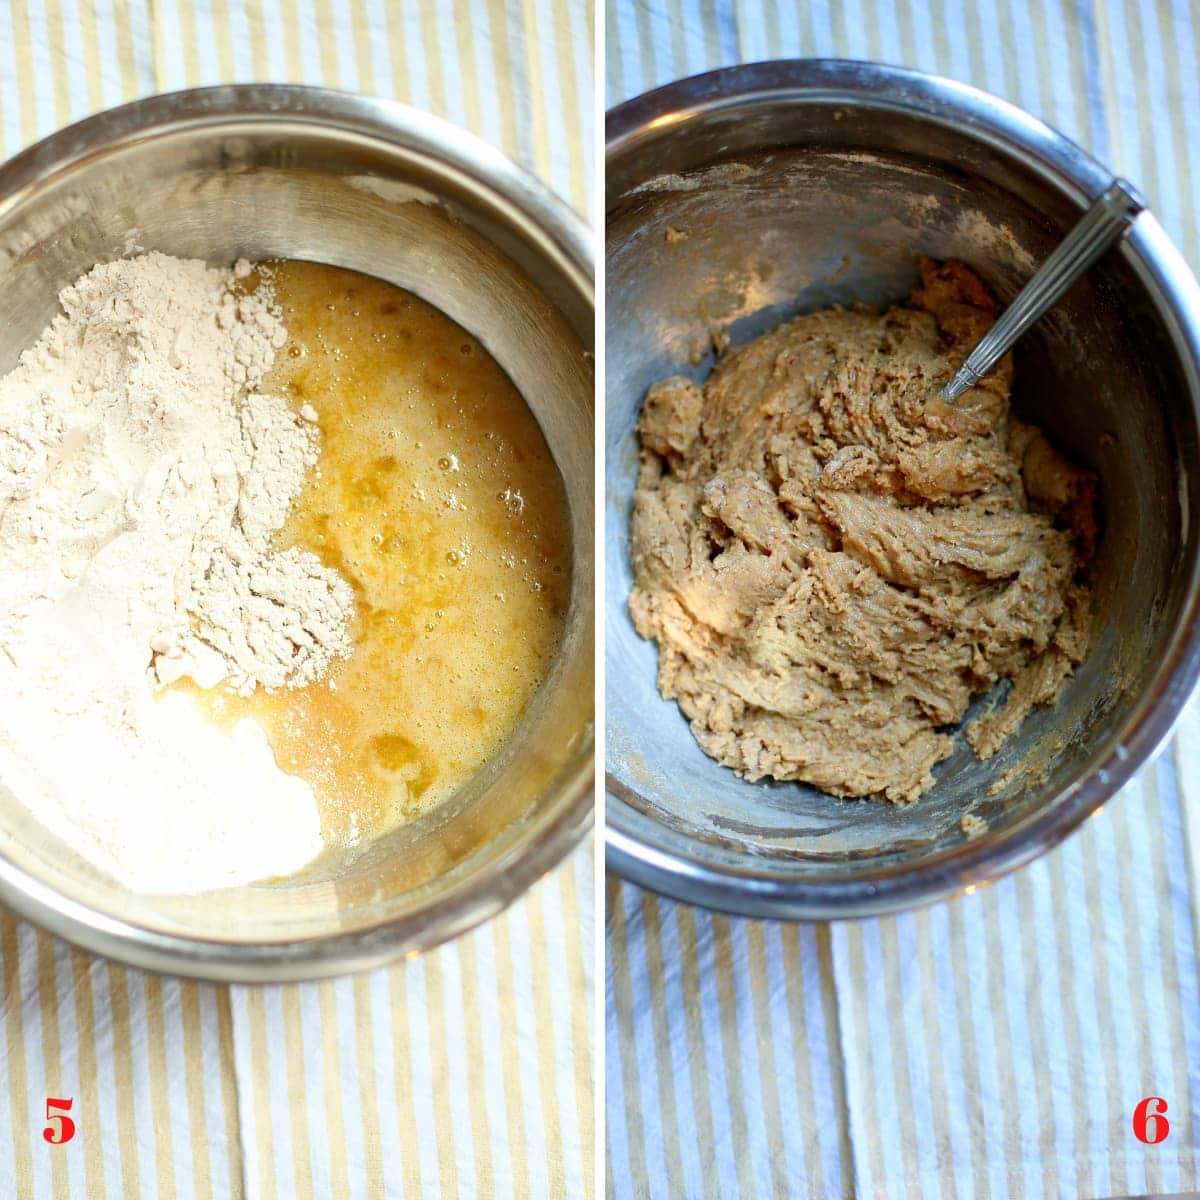 a before and after photo of ingredients in a bowl and then how they are mixed in the bowl.